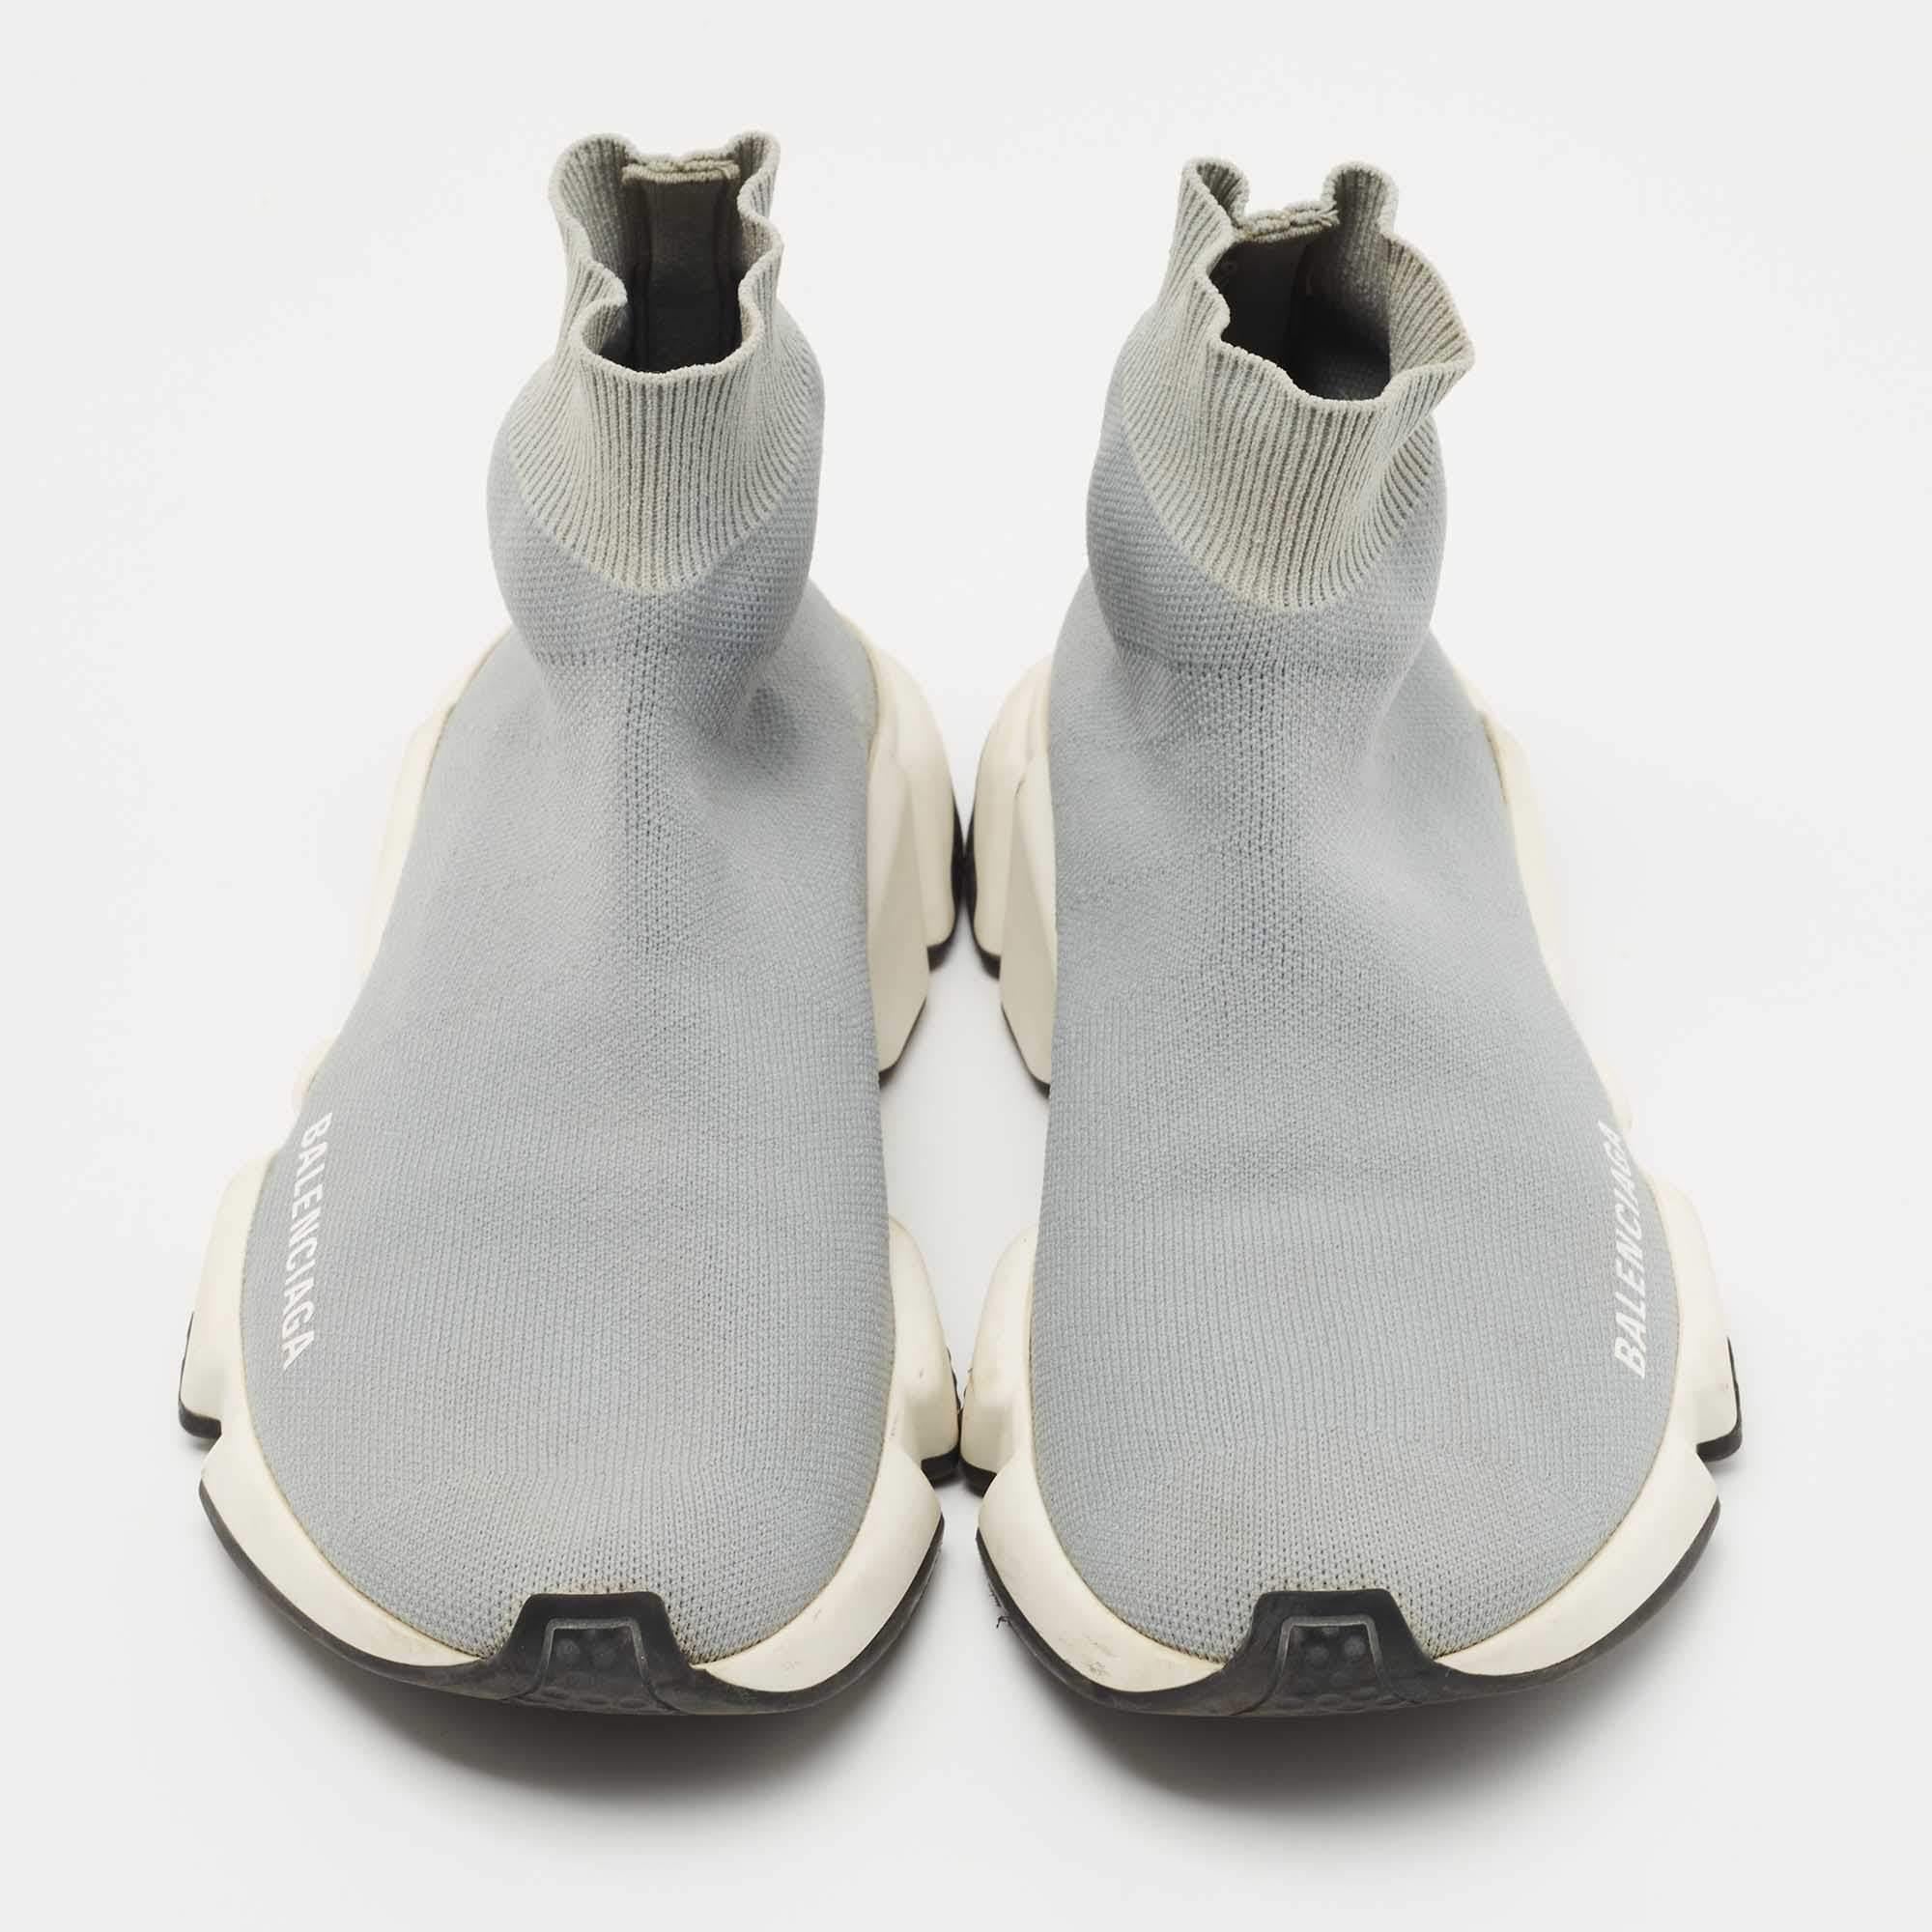 Celebrating the fusion of sports and luxury fashion, these Balenciaga Speed Trainer sneakers are absolutely worth the splurge. They are laceless and so well-crafted with breathable knit fabric in a sock style. Fully equipped to give you the best